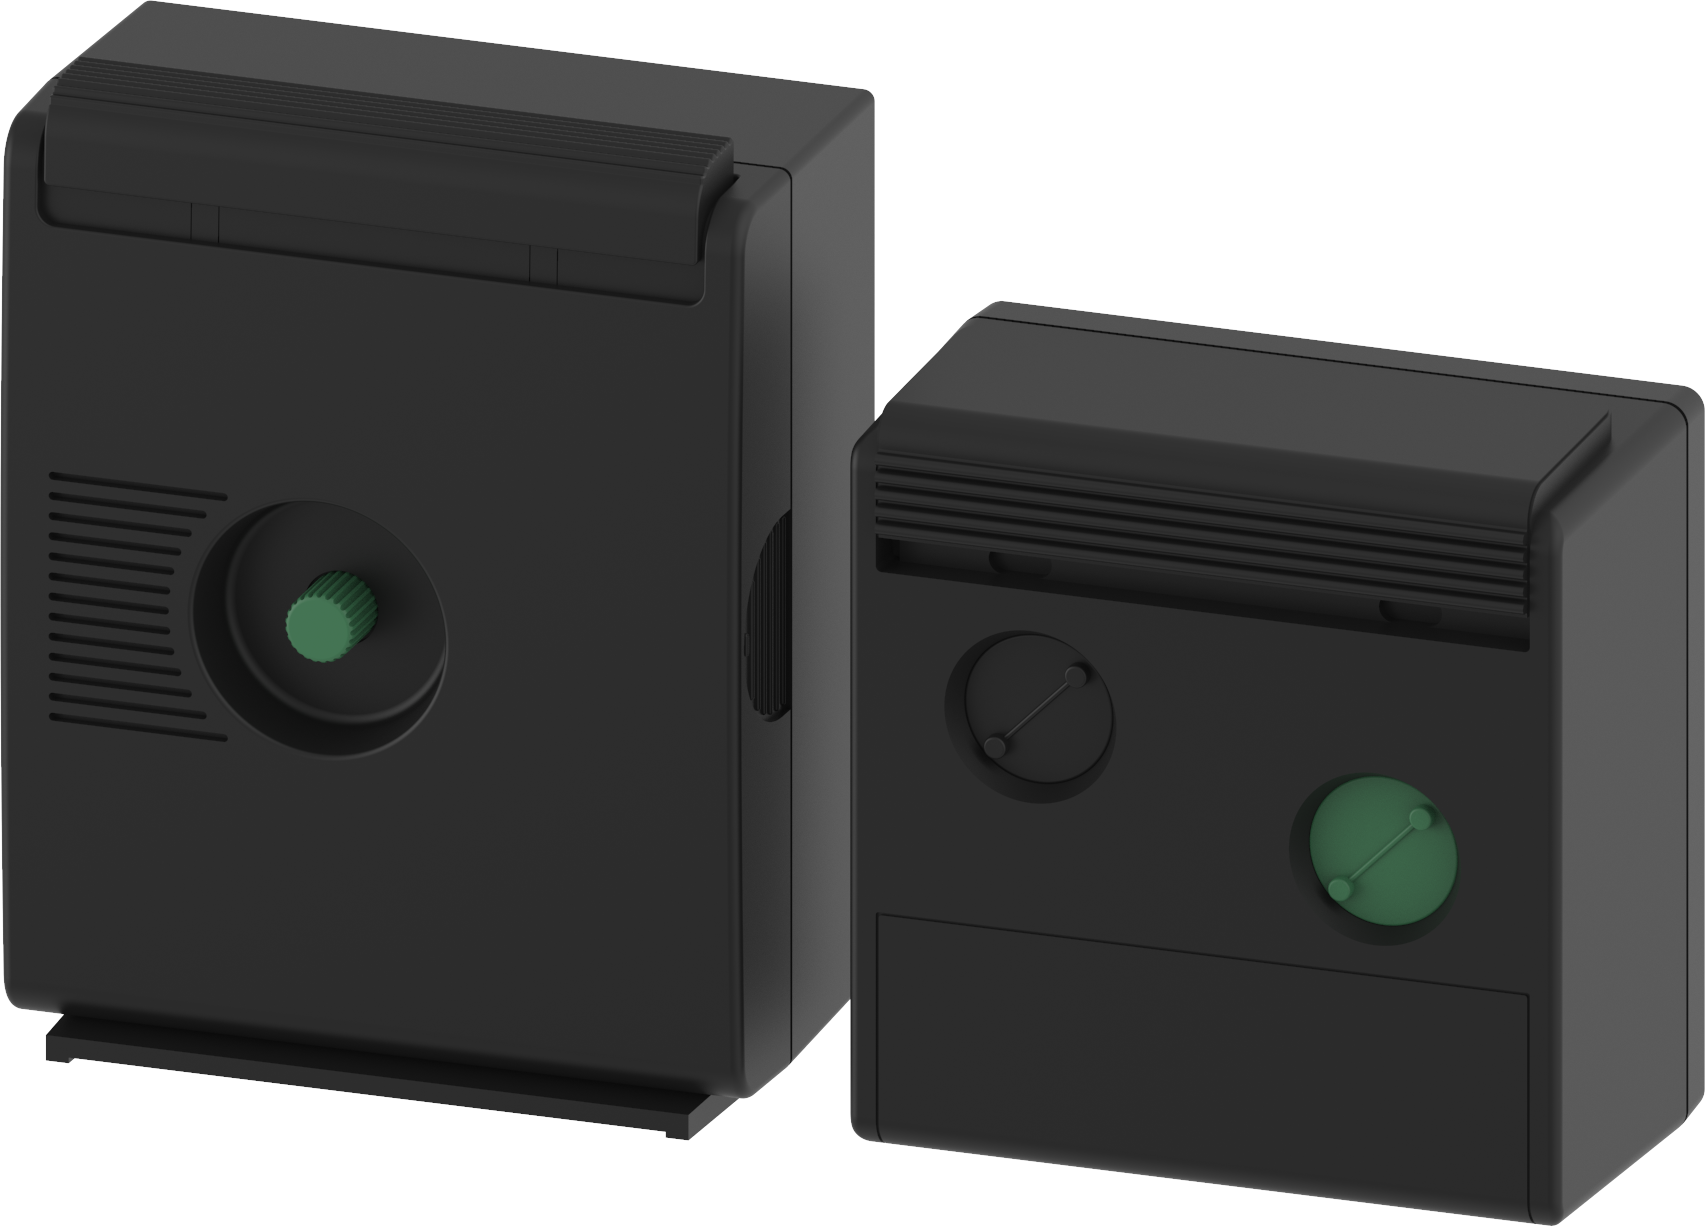 Render of two Braun alarm clocks from the back, showing the control dials and ridged alarm button surfaces